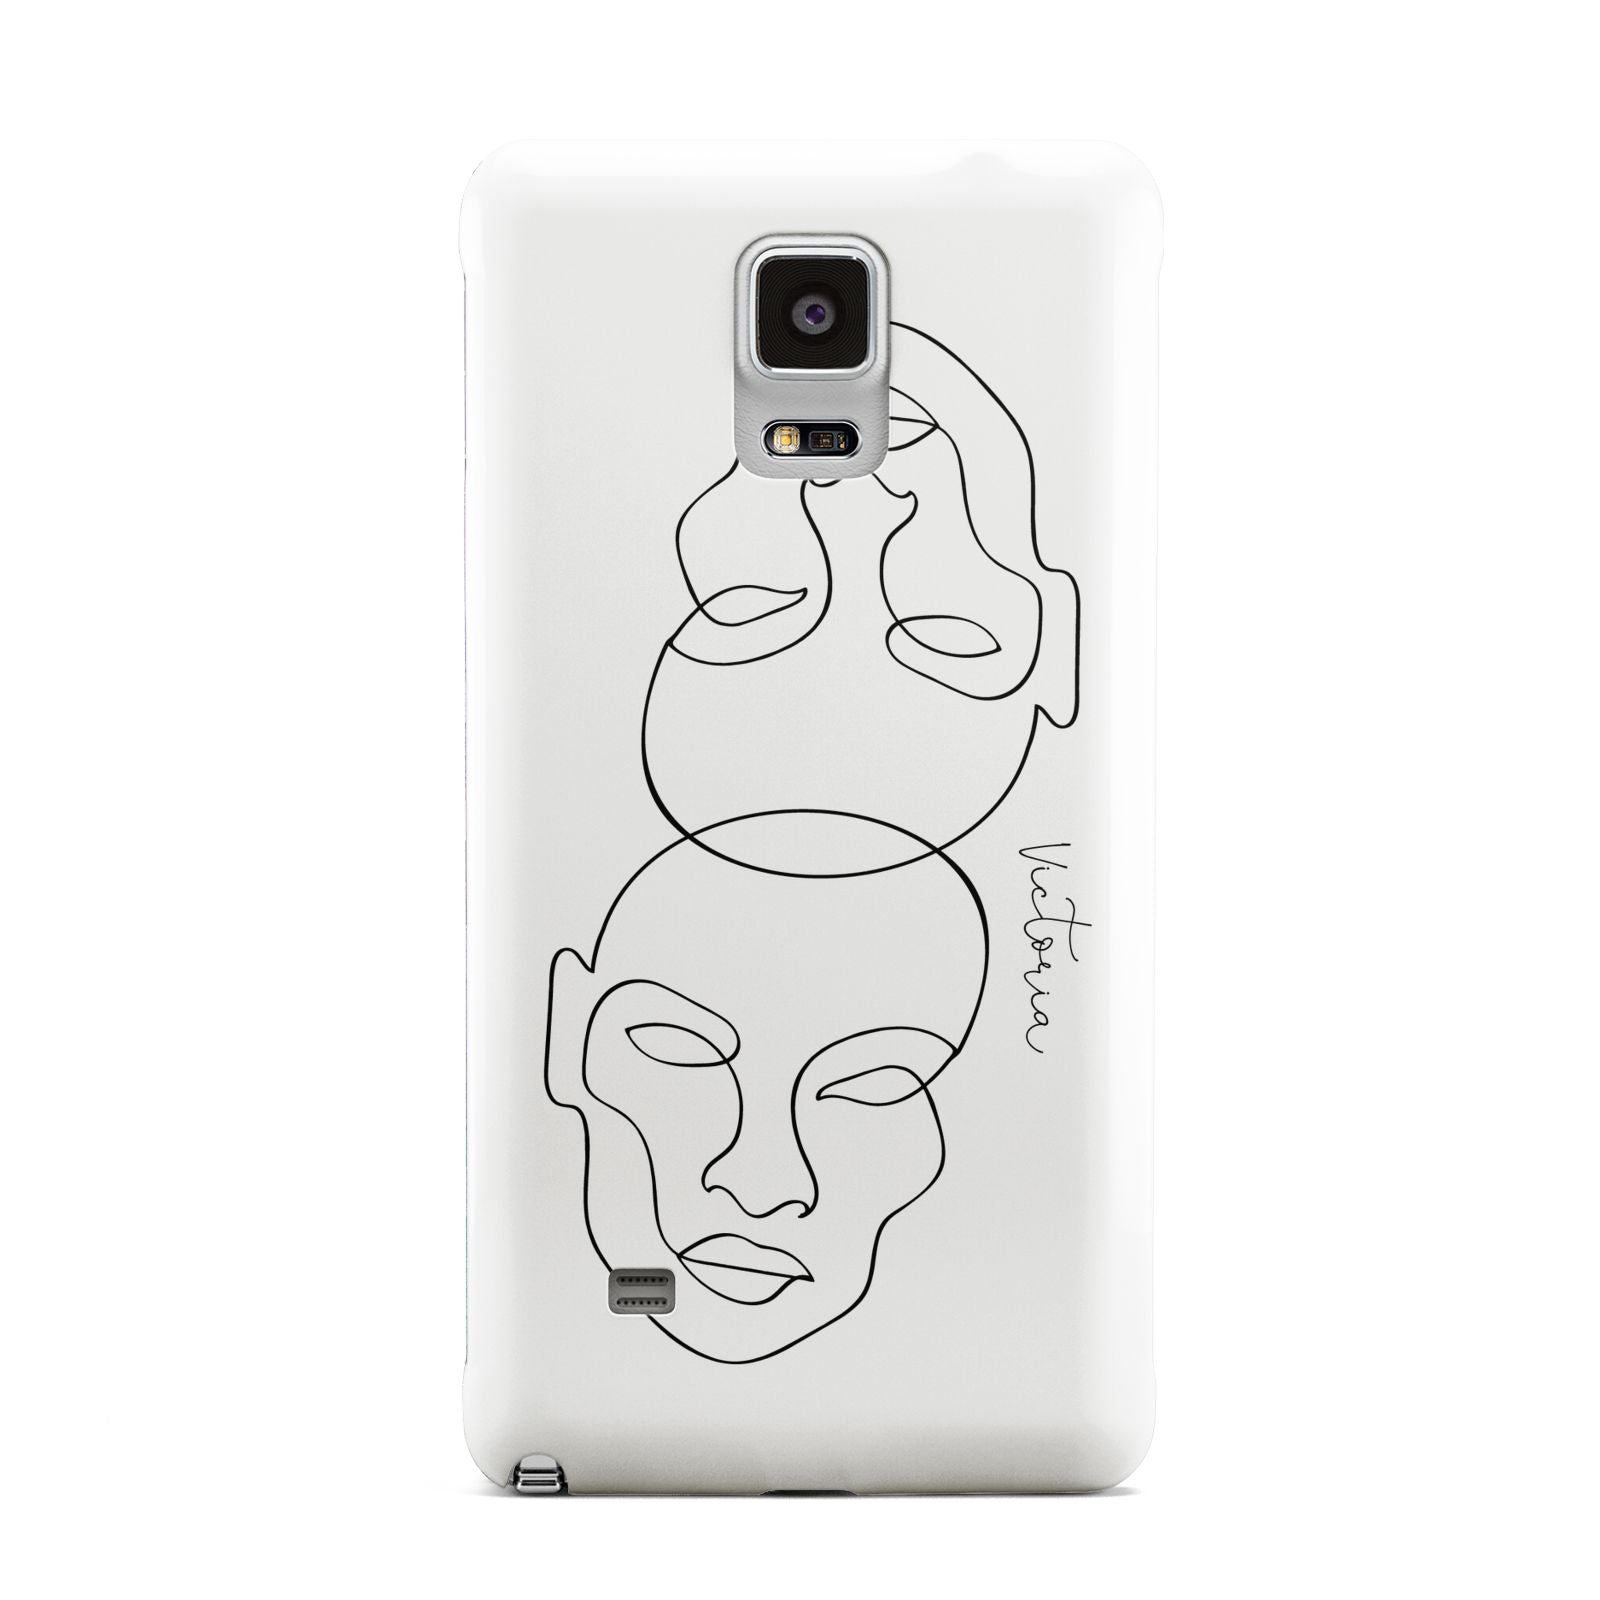 Personalised White Line Art Samsung Galaxy Note 4 Case